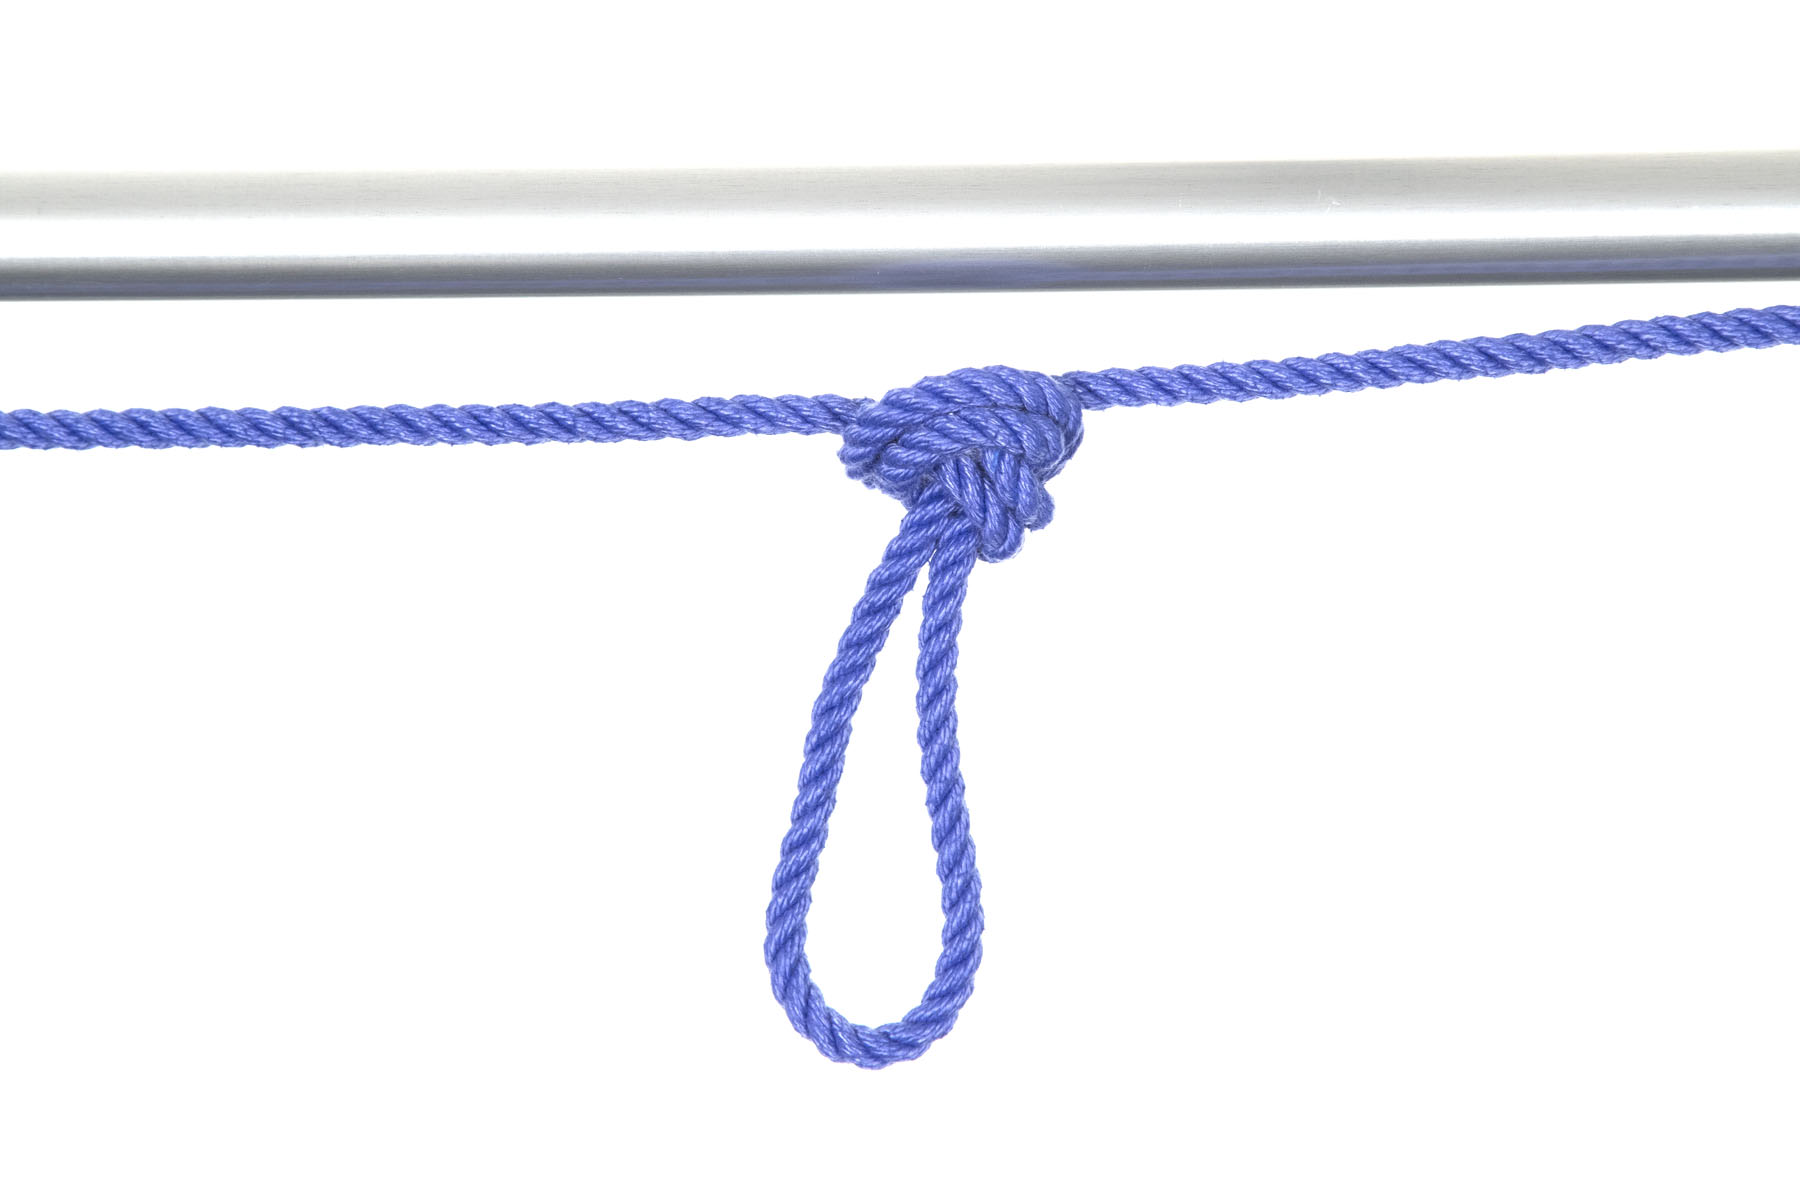 A one inch aluminum pipe crosses the frame horizontally. A blue rope runs alongside it. In the middle of the frame, an eight inch bight of the rope has been tied in an overhand knot, making a six inch loop that extends at a perpendicular angle to the pipe.